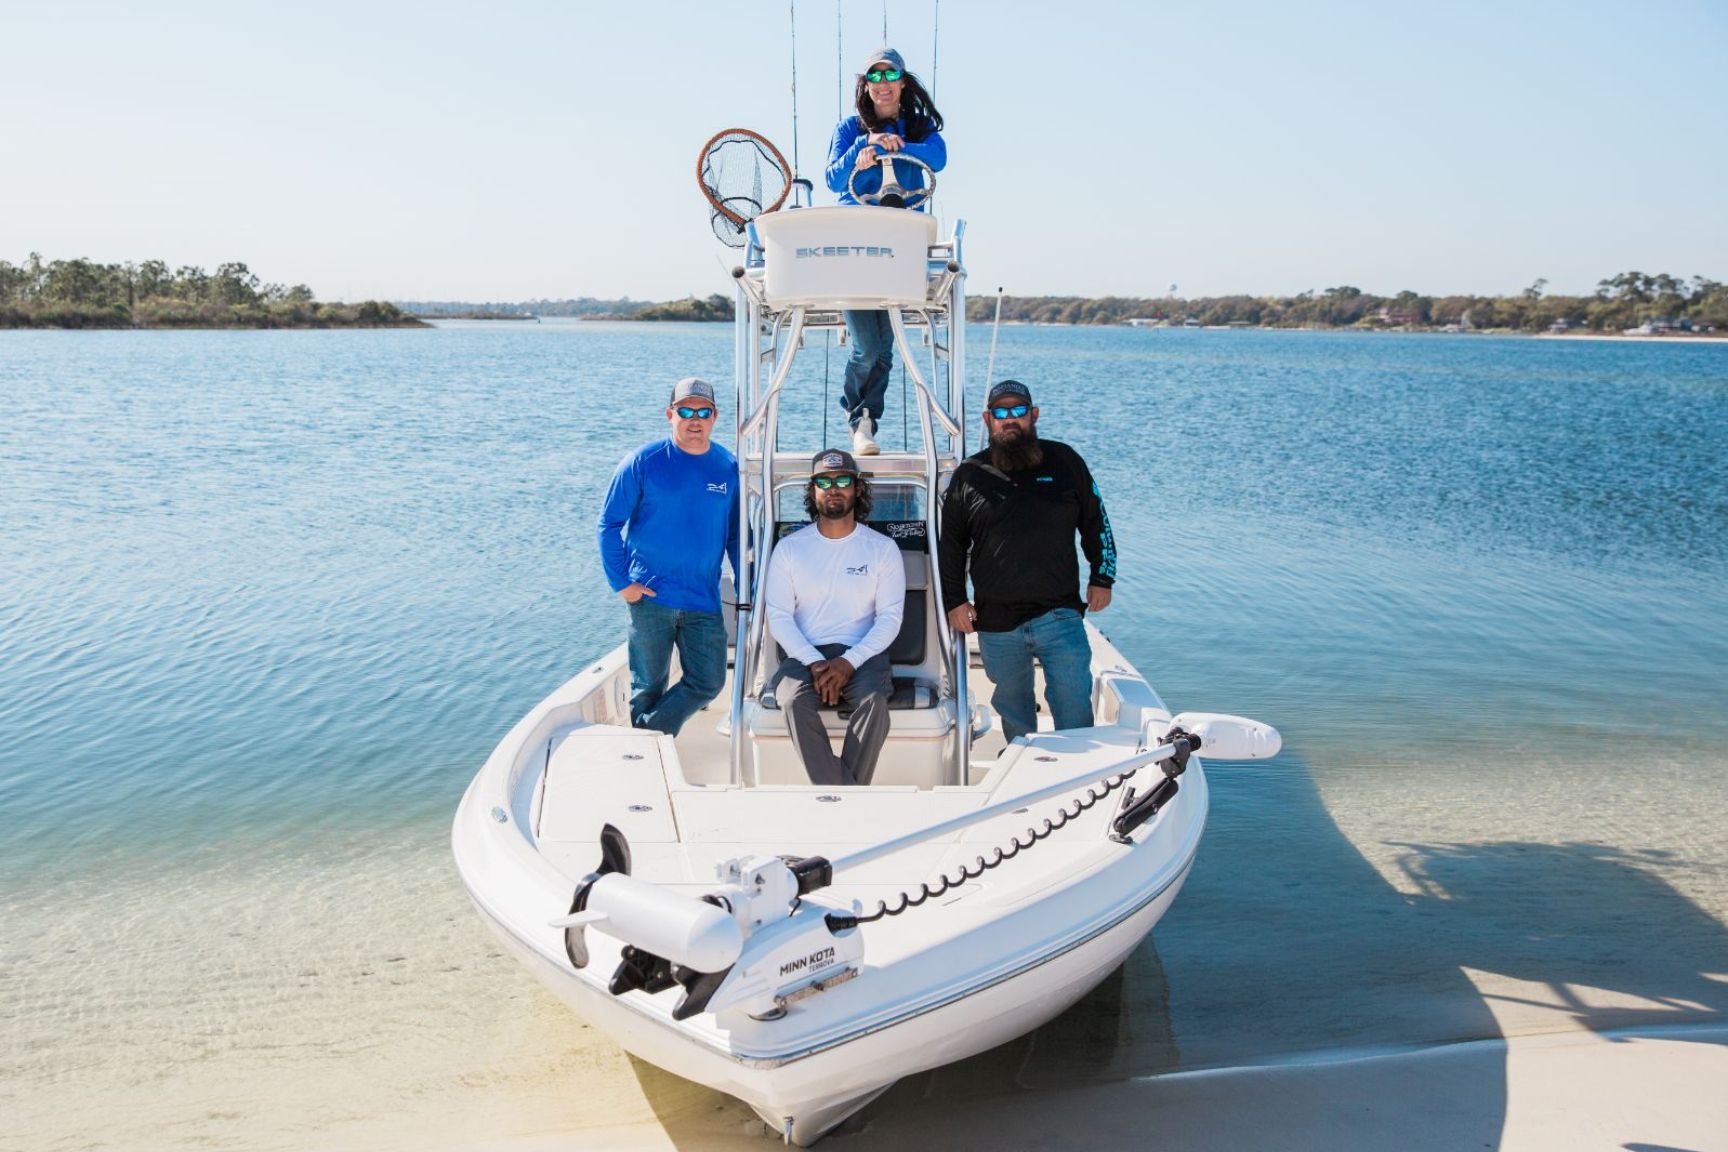 The Captains from Panhandle Fishing Charters pose during a rare break from fishing near Destin, FL